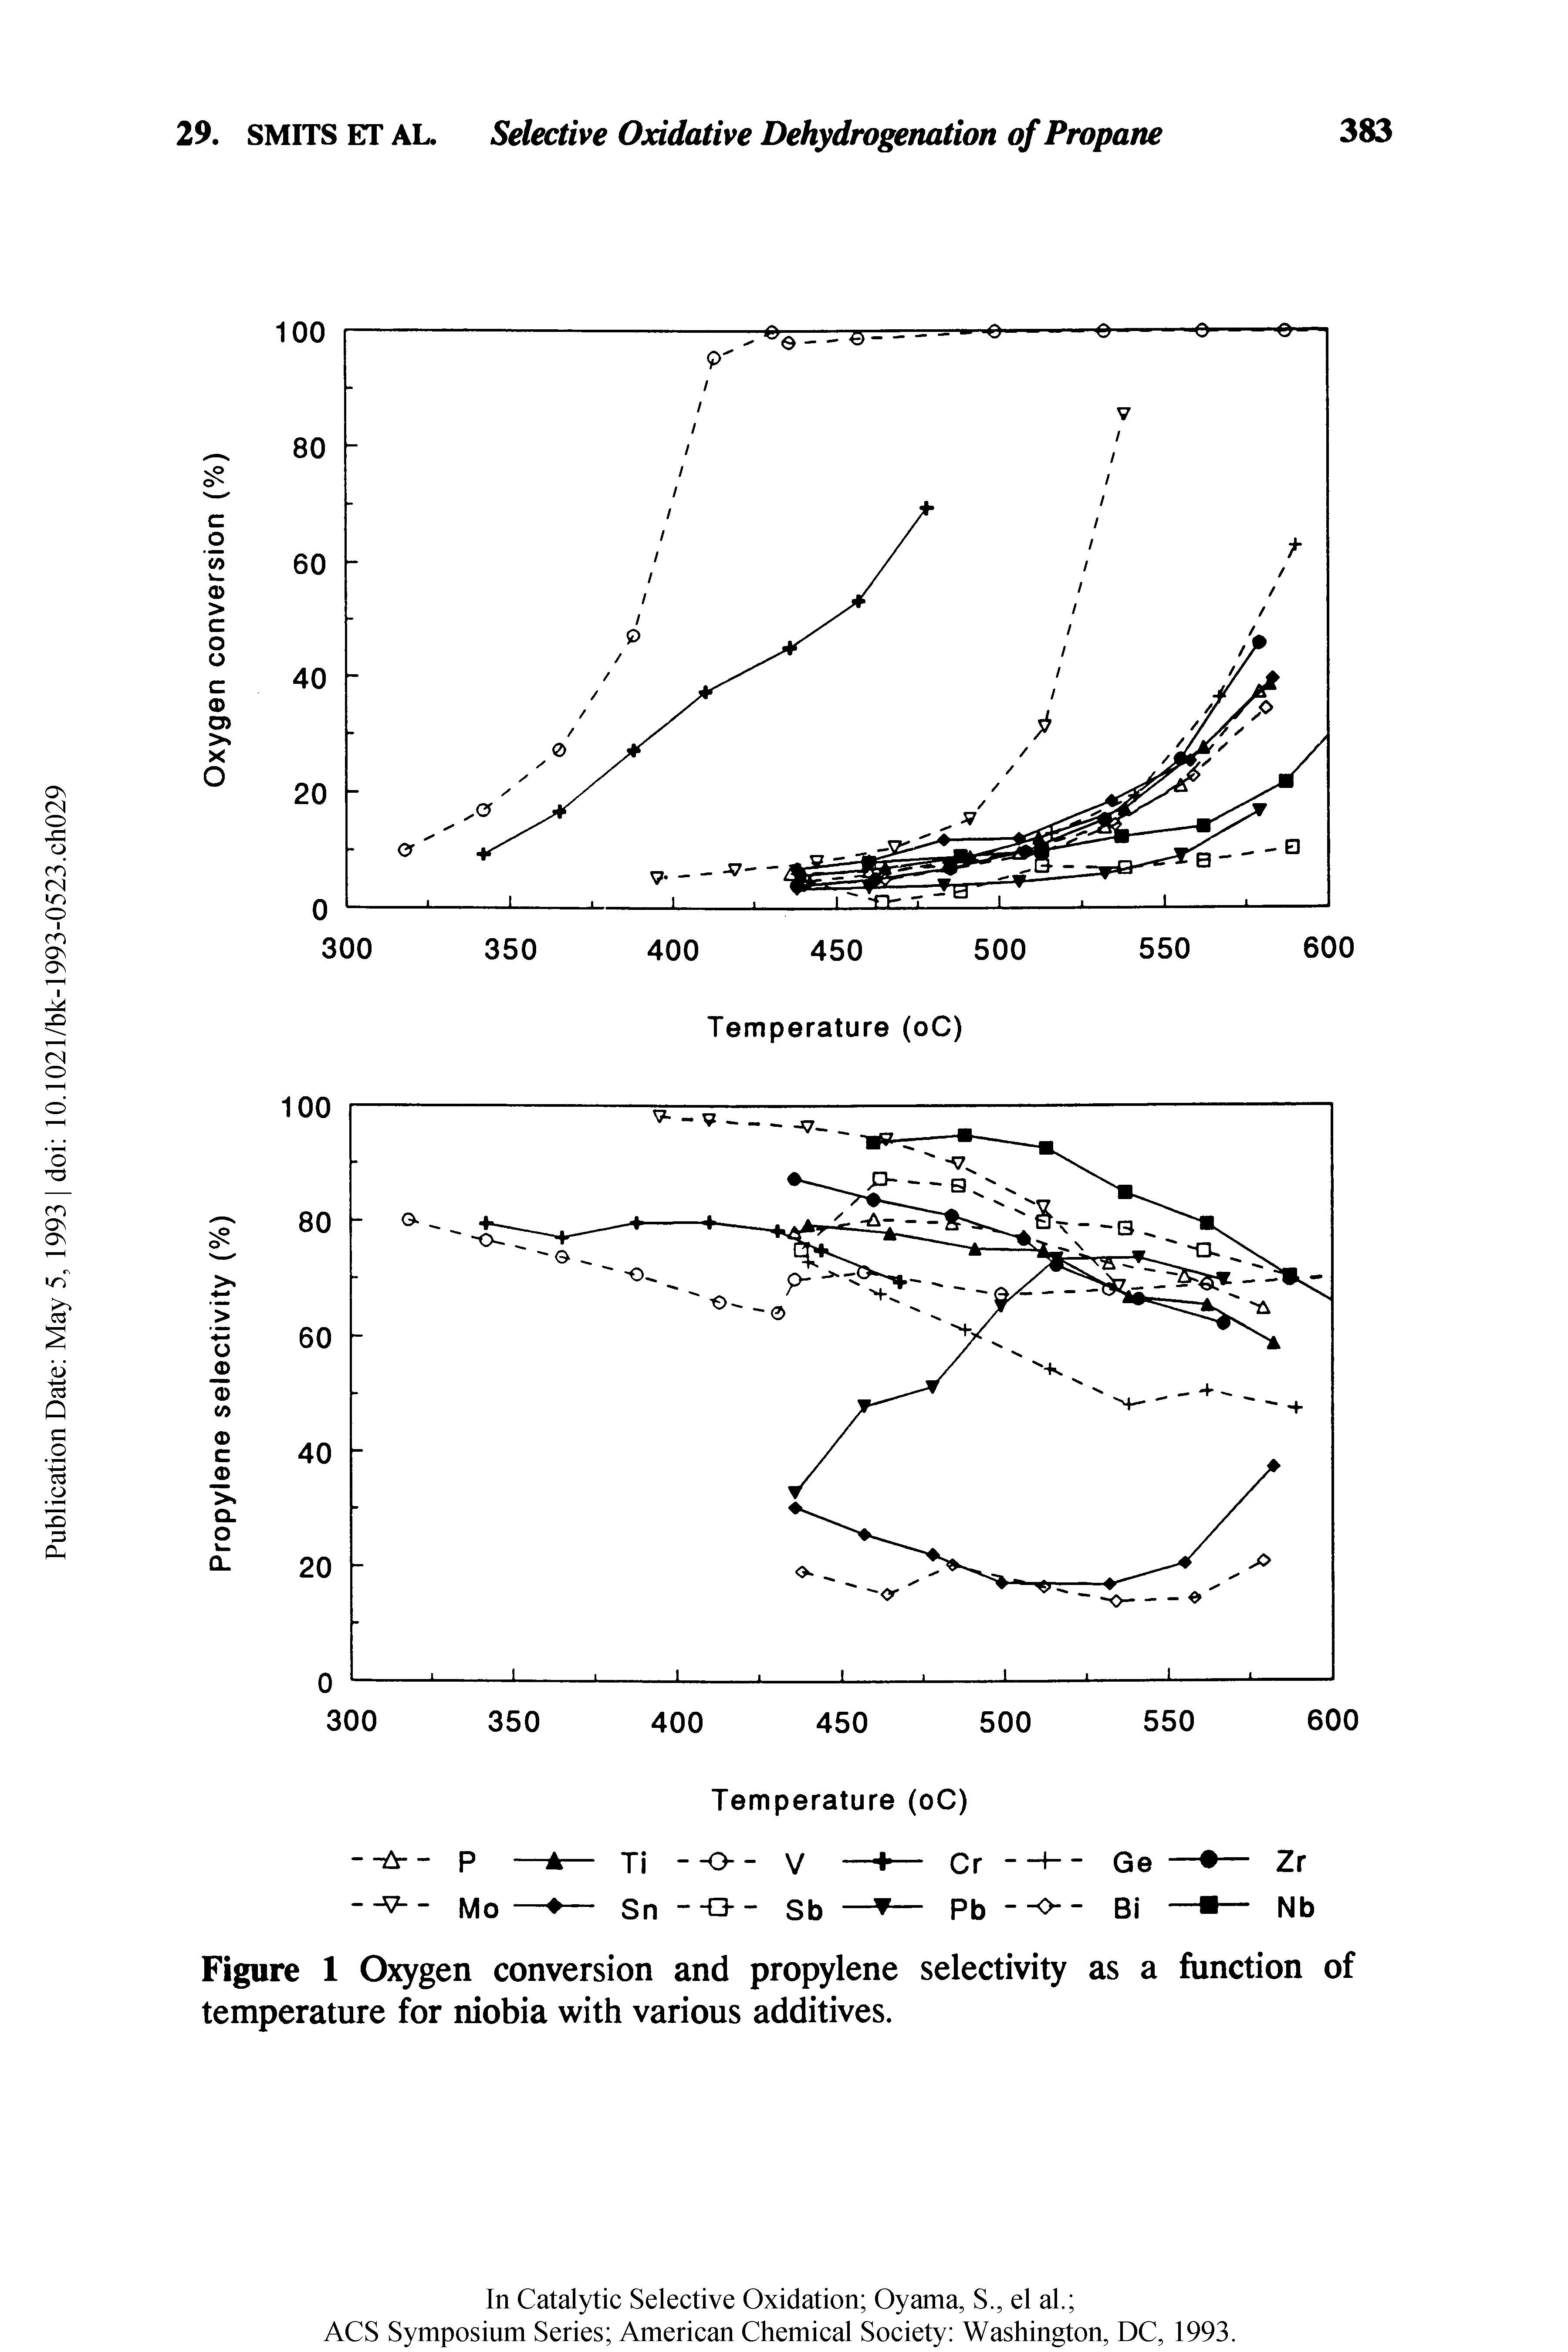 Figure 1 Oxygen conversion and propylene selectivity as a function of temperature for niobia with various additives.